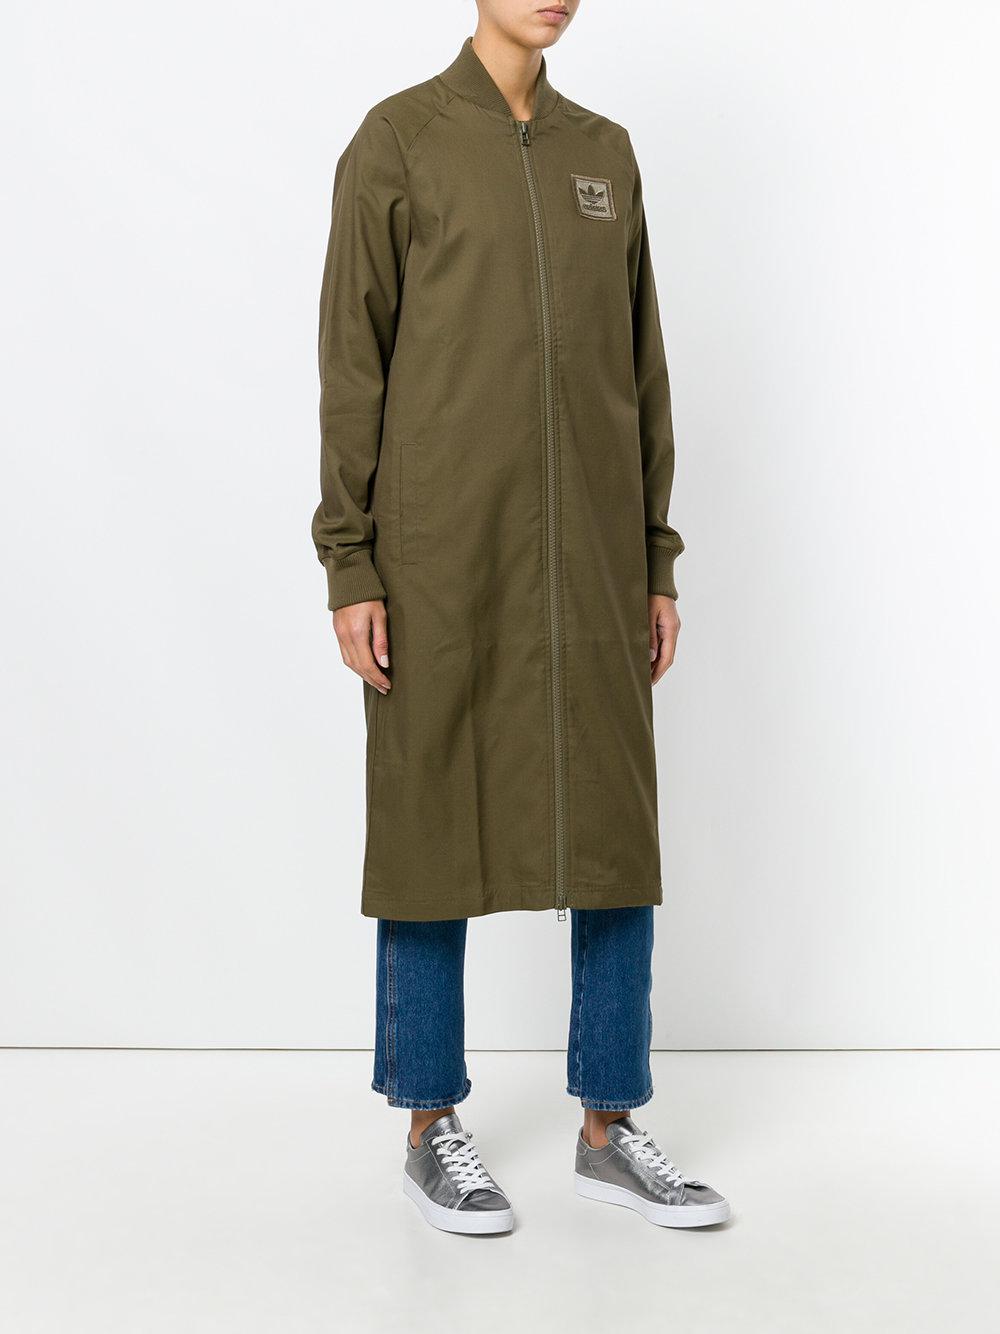 adidas Originals Cotton Extra Long Bomber Jacket in Green | Lyst